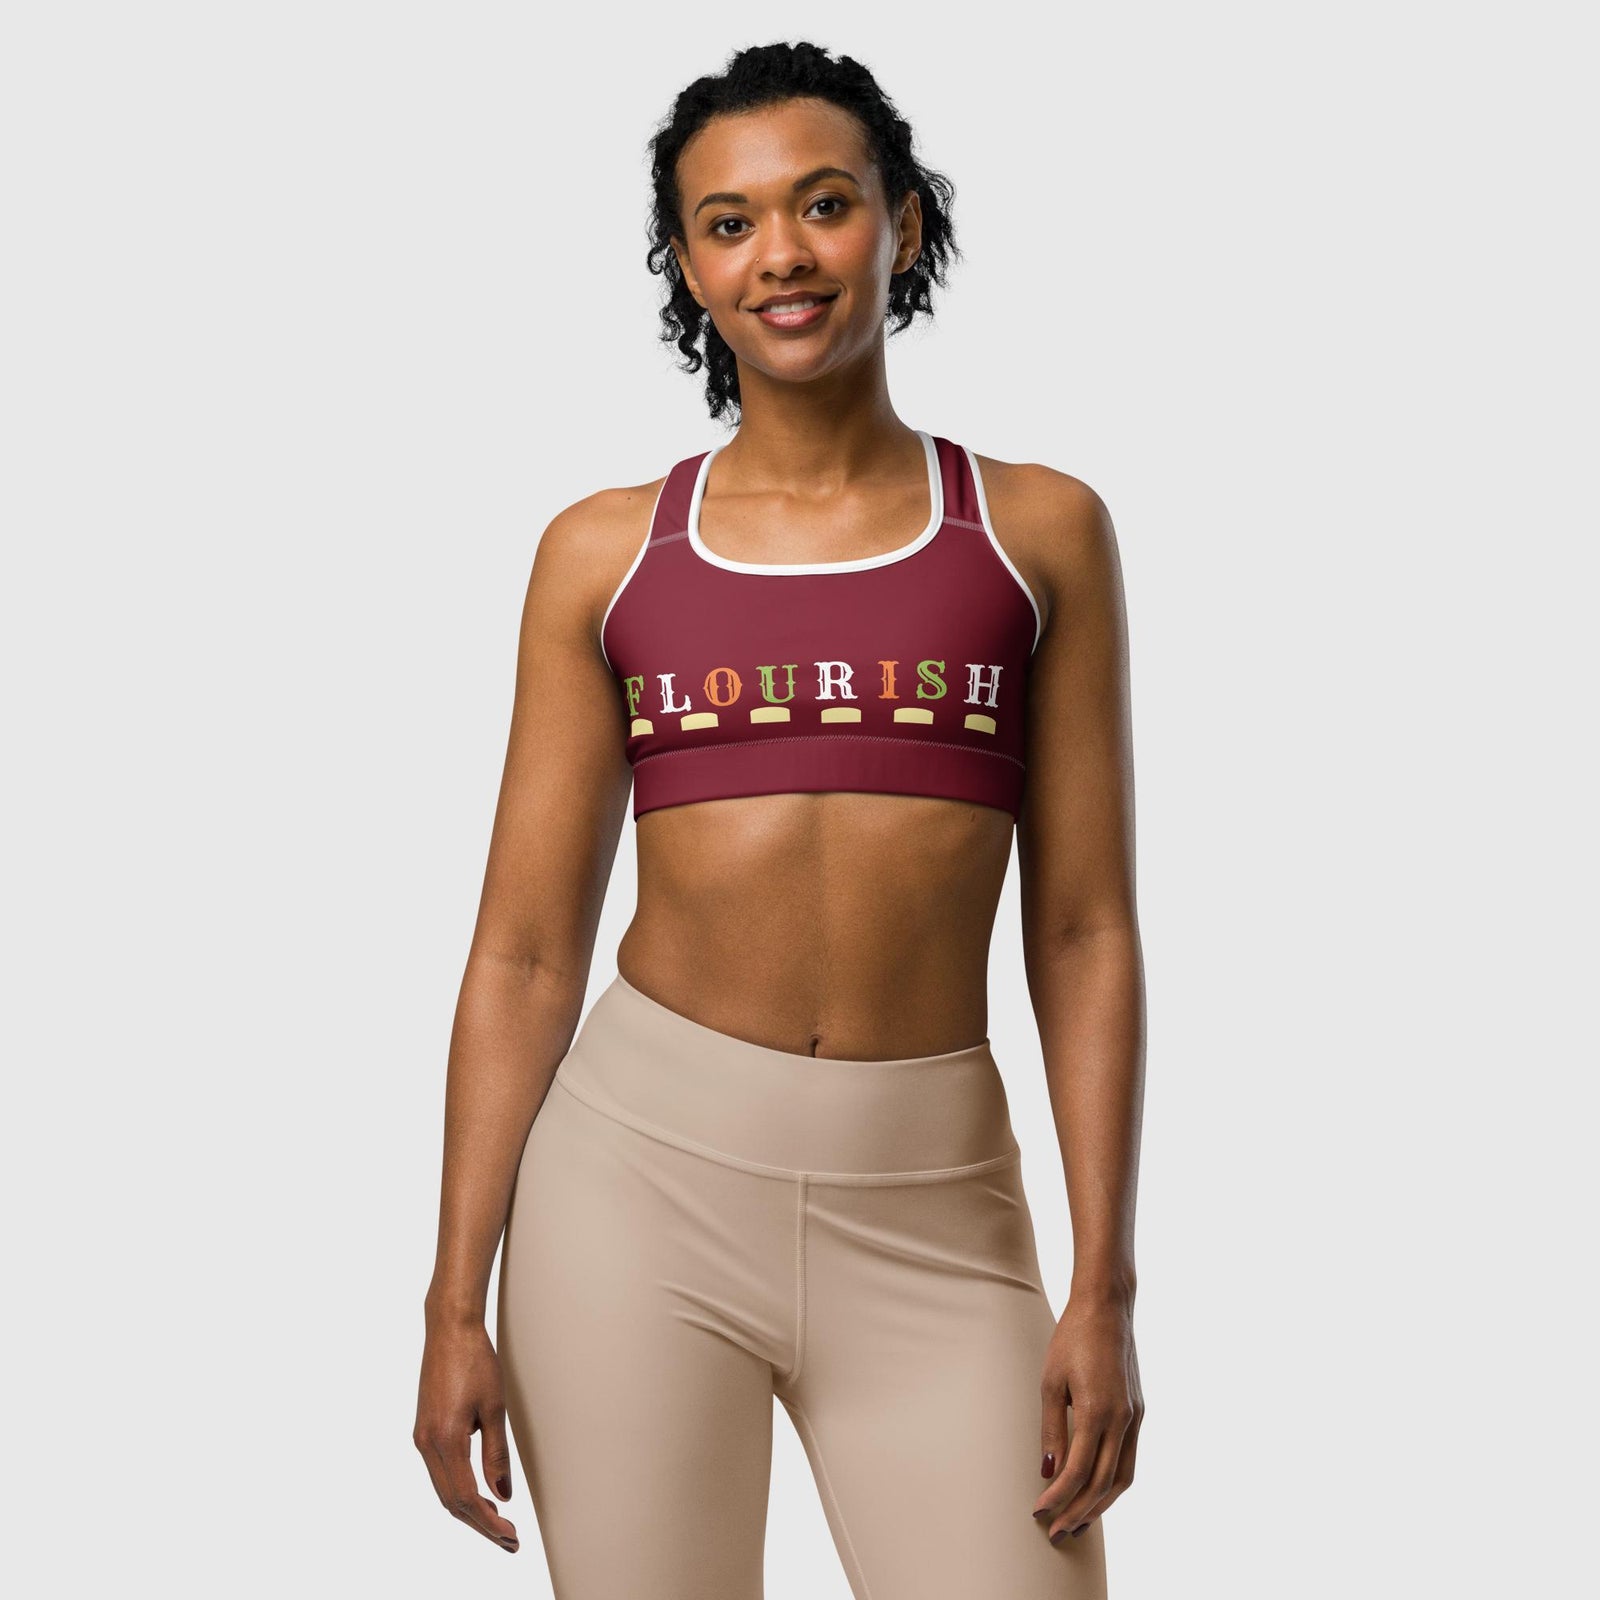 Active Women's Flourish Sports Bra - Revive Wear This gorgeous sports bra is made from moisture-wicking material that stays dry during low and medium-intensity workouts. Shop this Moisture Wicking Sports Bra at Revive Wear!